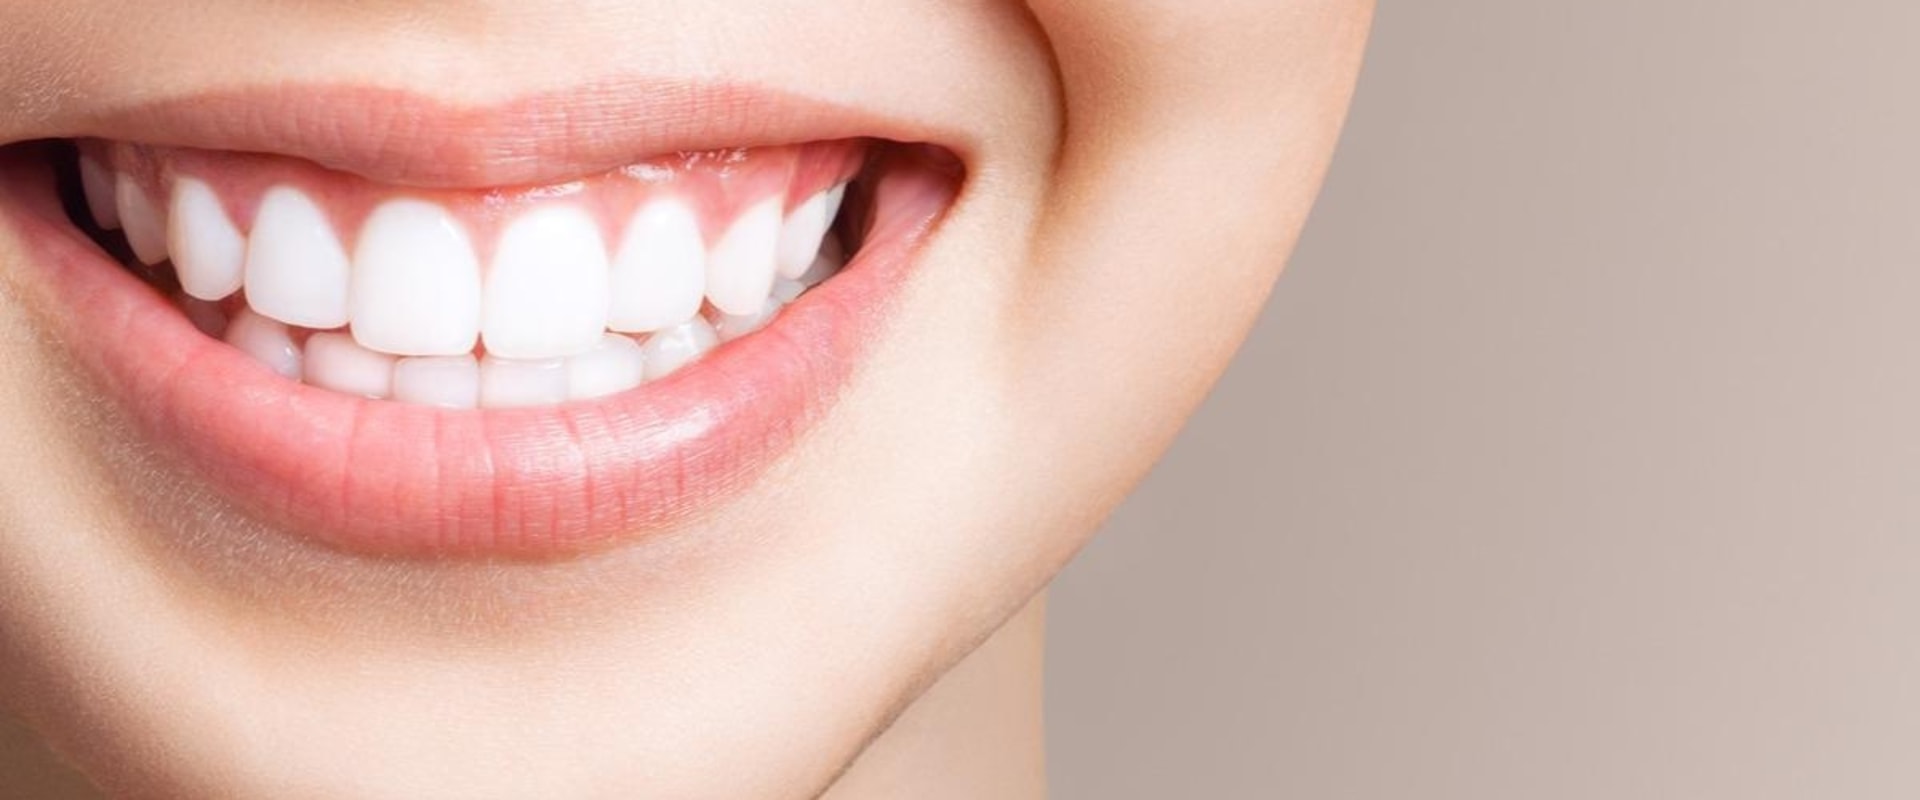 What is Titanium Dioxide and How Does it Impact Teeth Whitening Products?